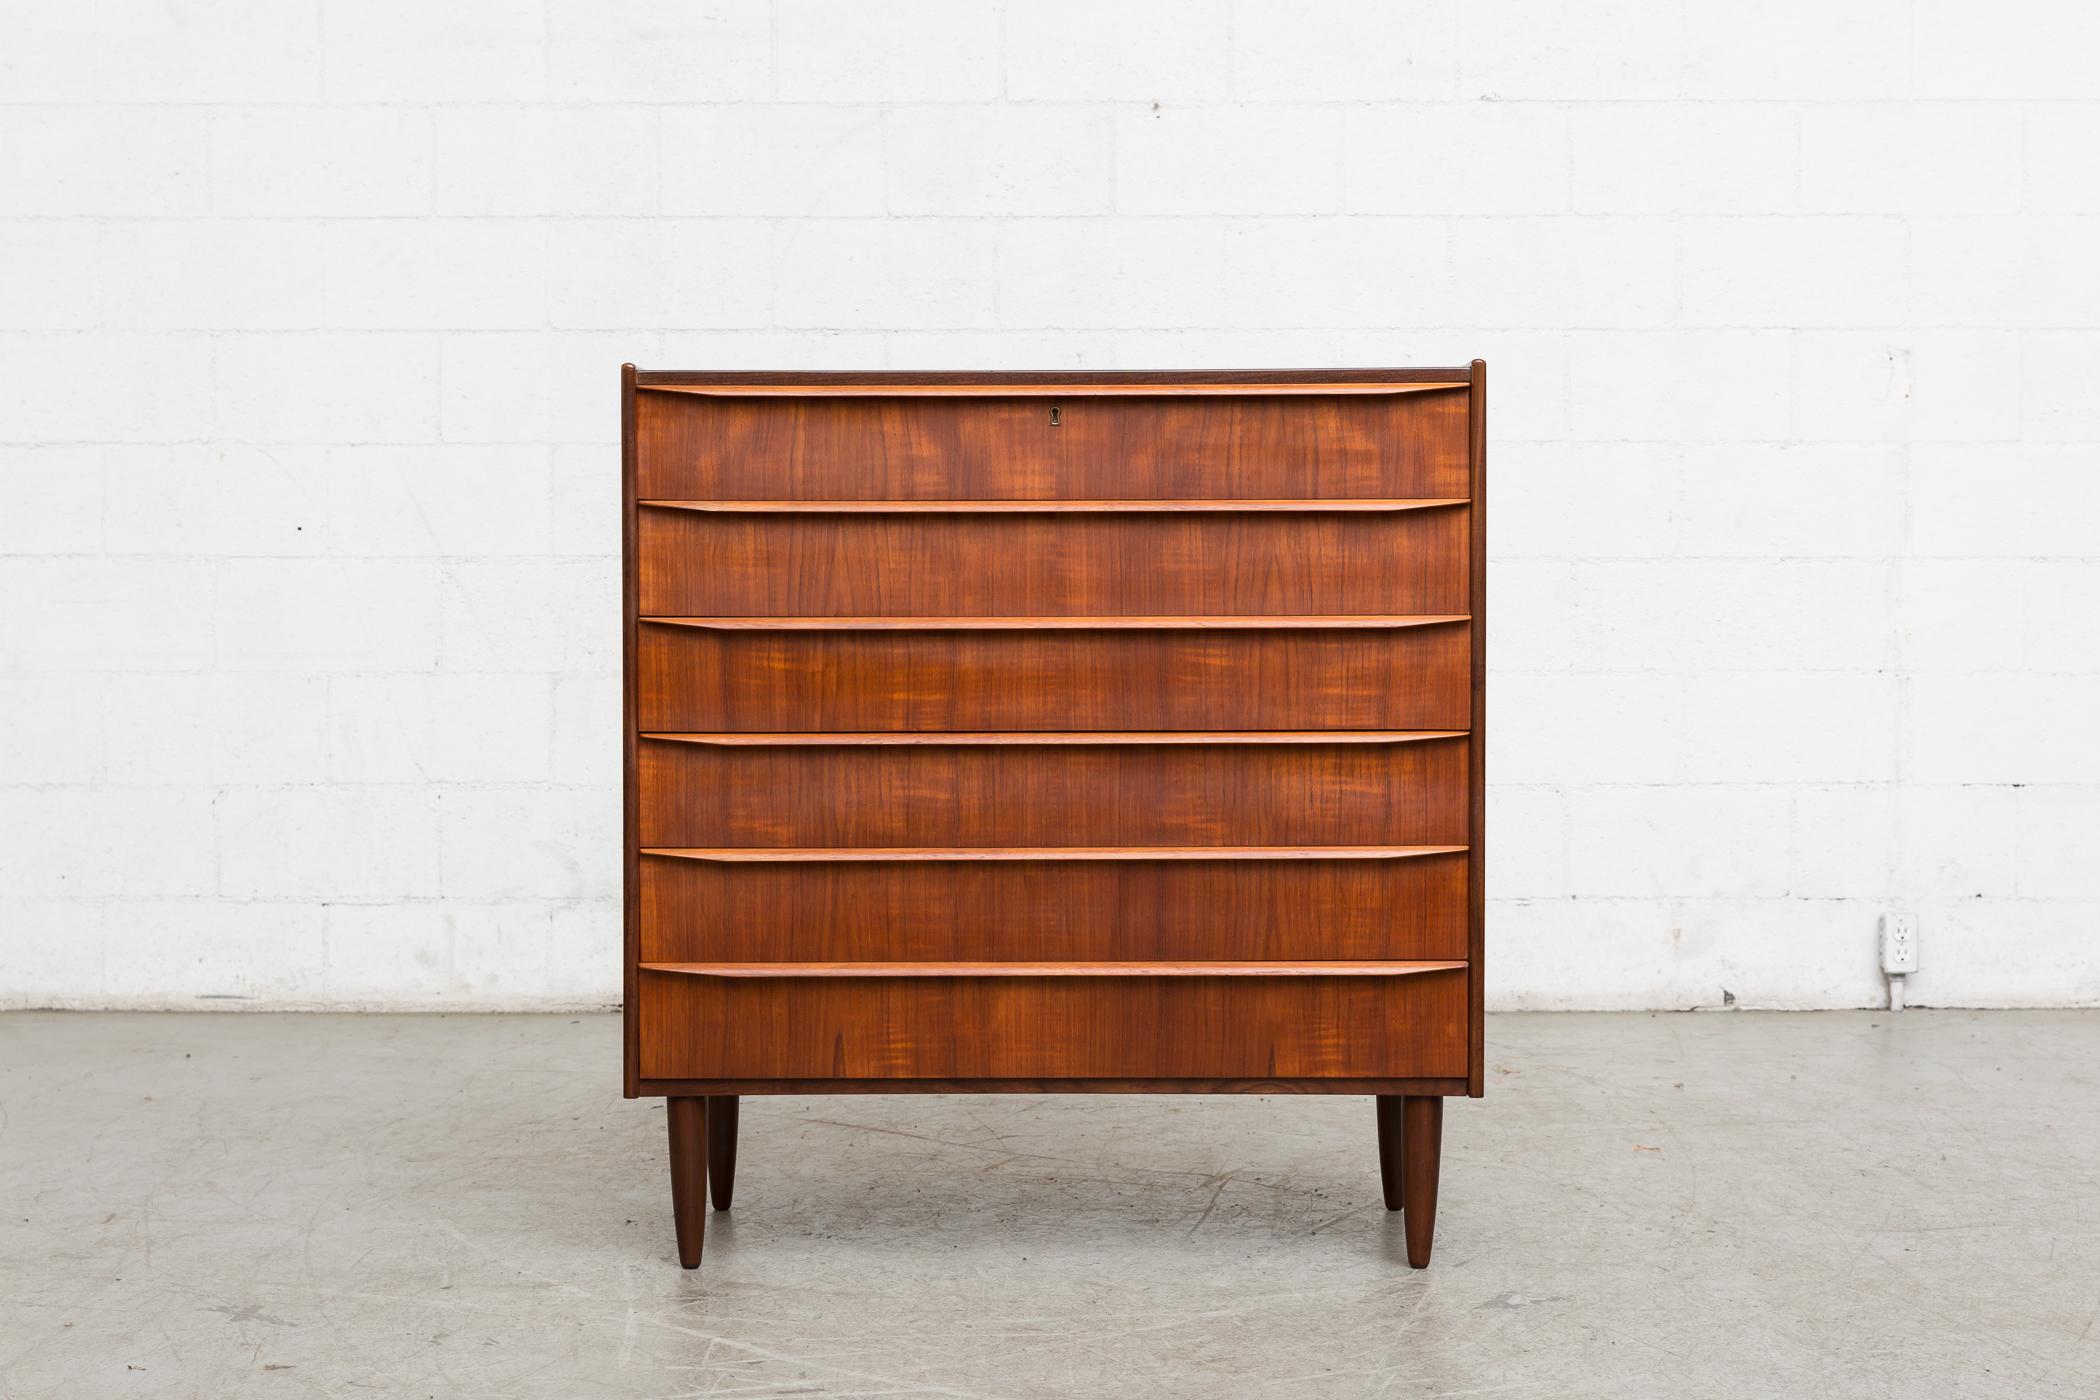 Midcentury Danish teak dresser with six drawers and organically carved linear hand pulls. Tapered legs. Lightly refinished. Good original condition, 1960s, Denmark.